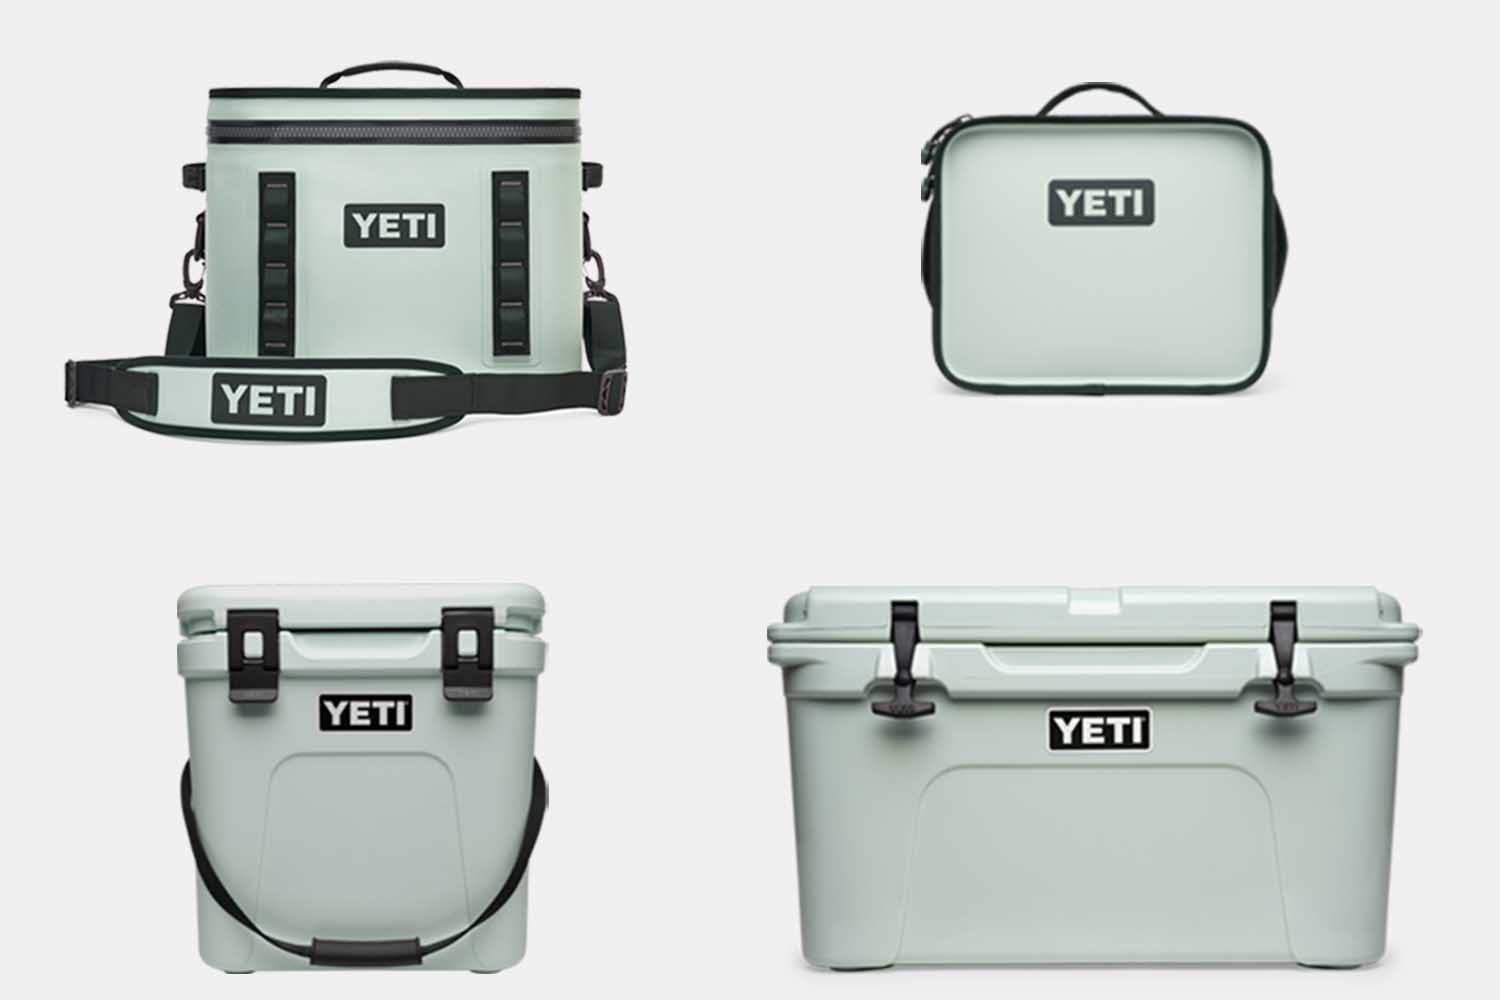 new yeti products coming soon